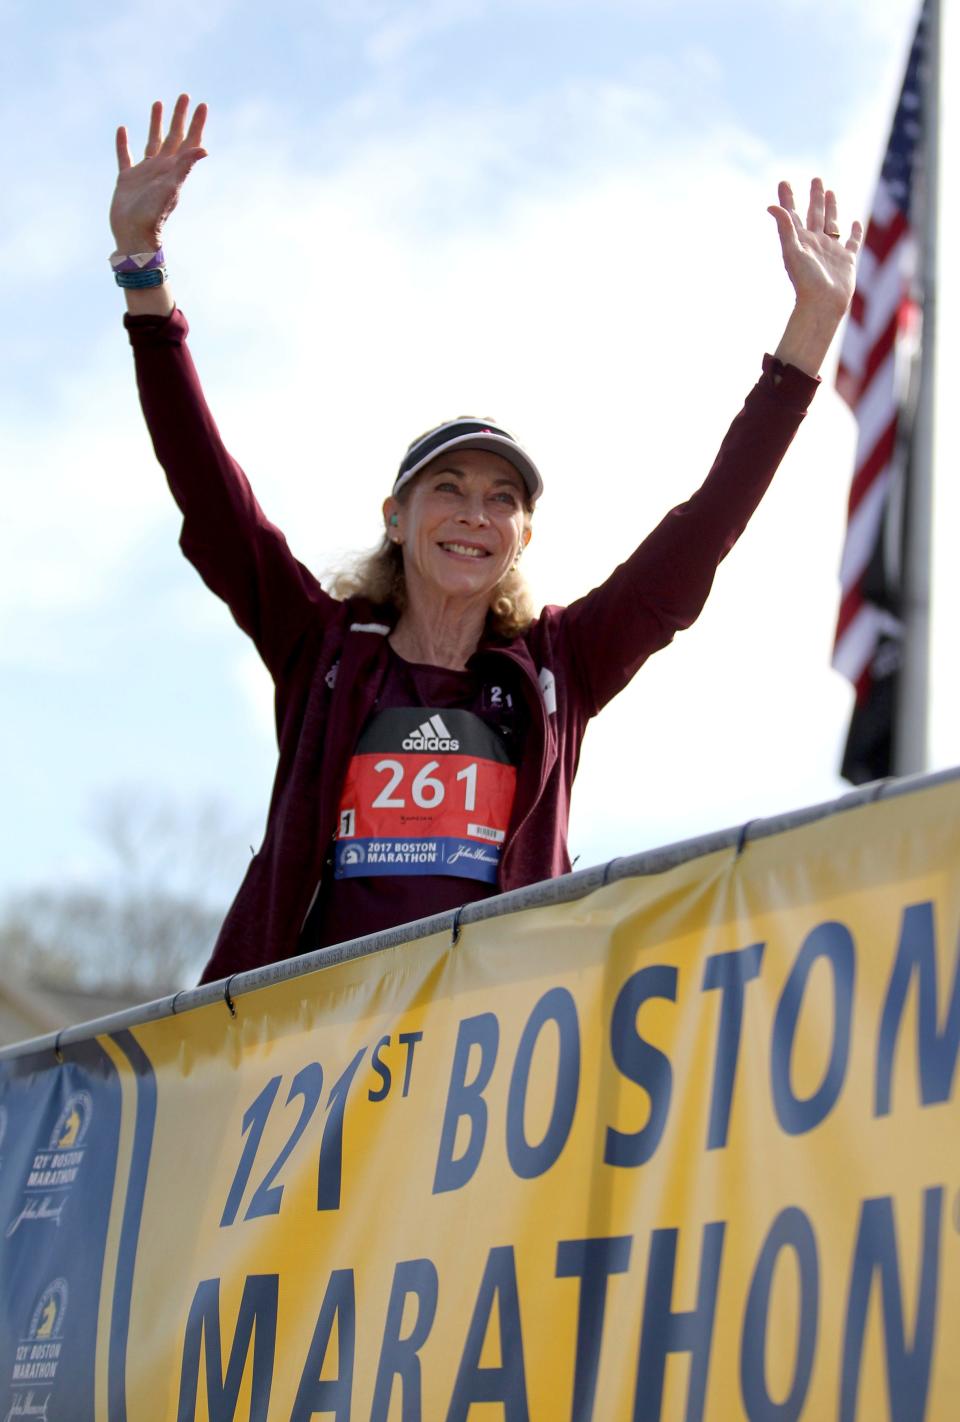 Kathrine Switzer, who was the first official woman entrant in the Boston Marathon 50 years ago, waves to the crowd at the start of the 2017 Boston Marathon in Hopkinton, Mass., April 17, 2017.